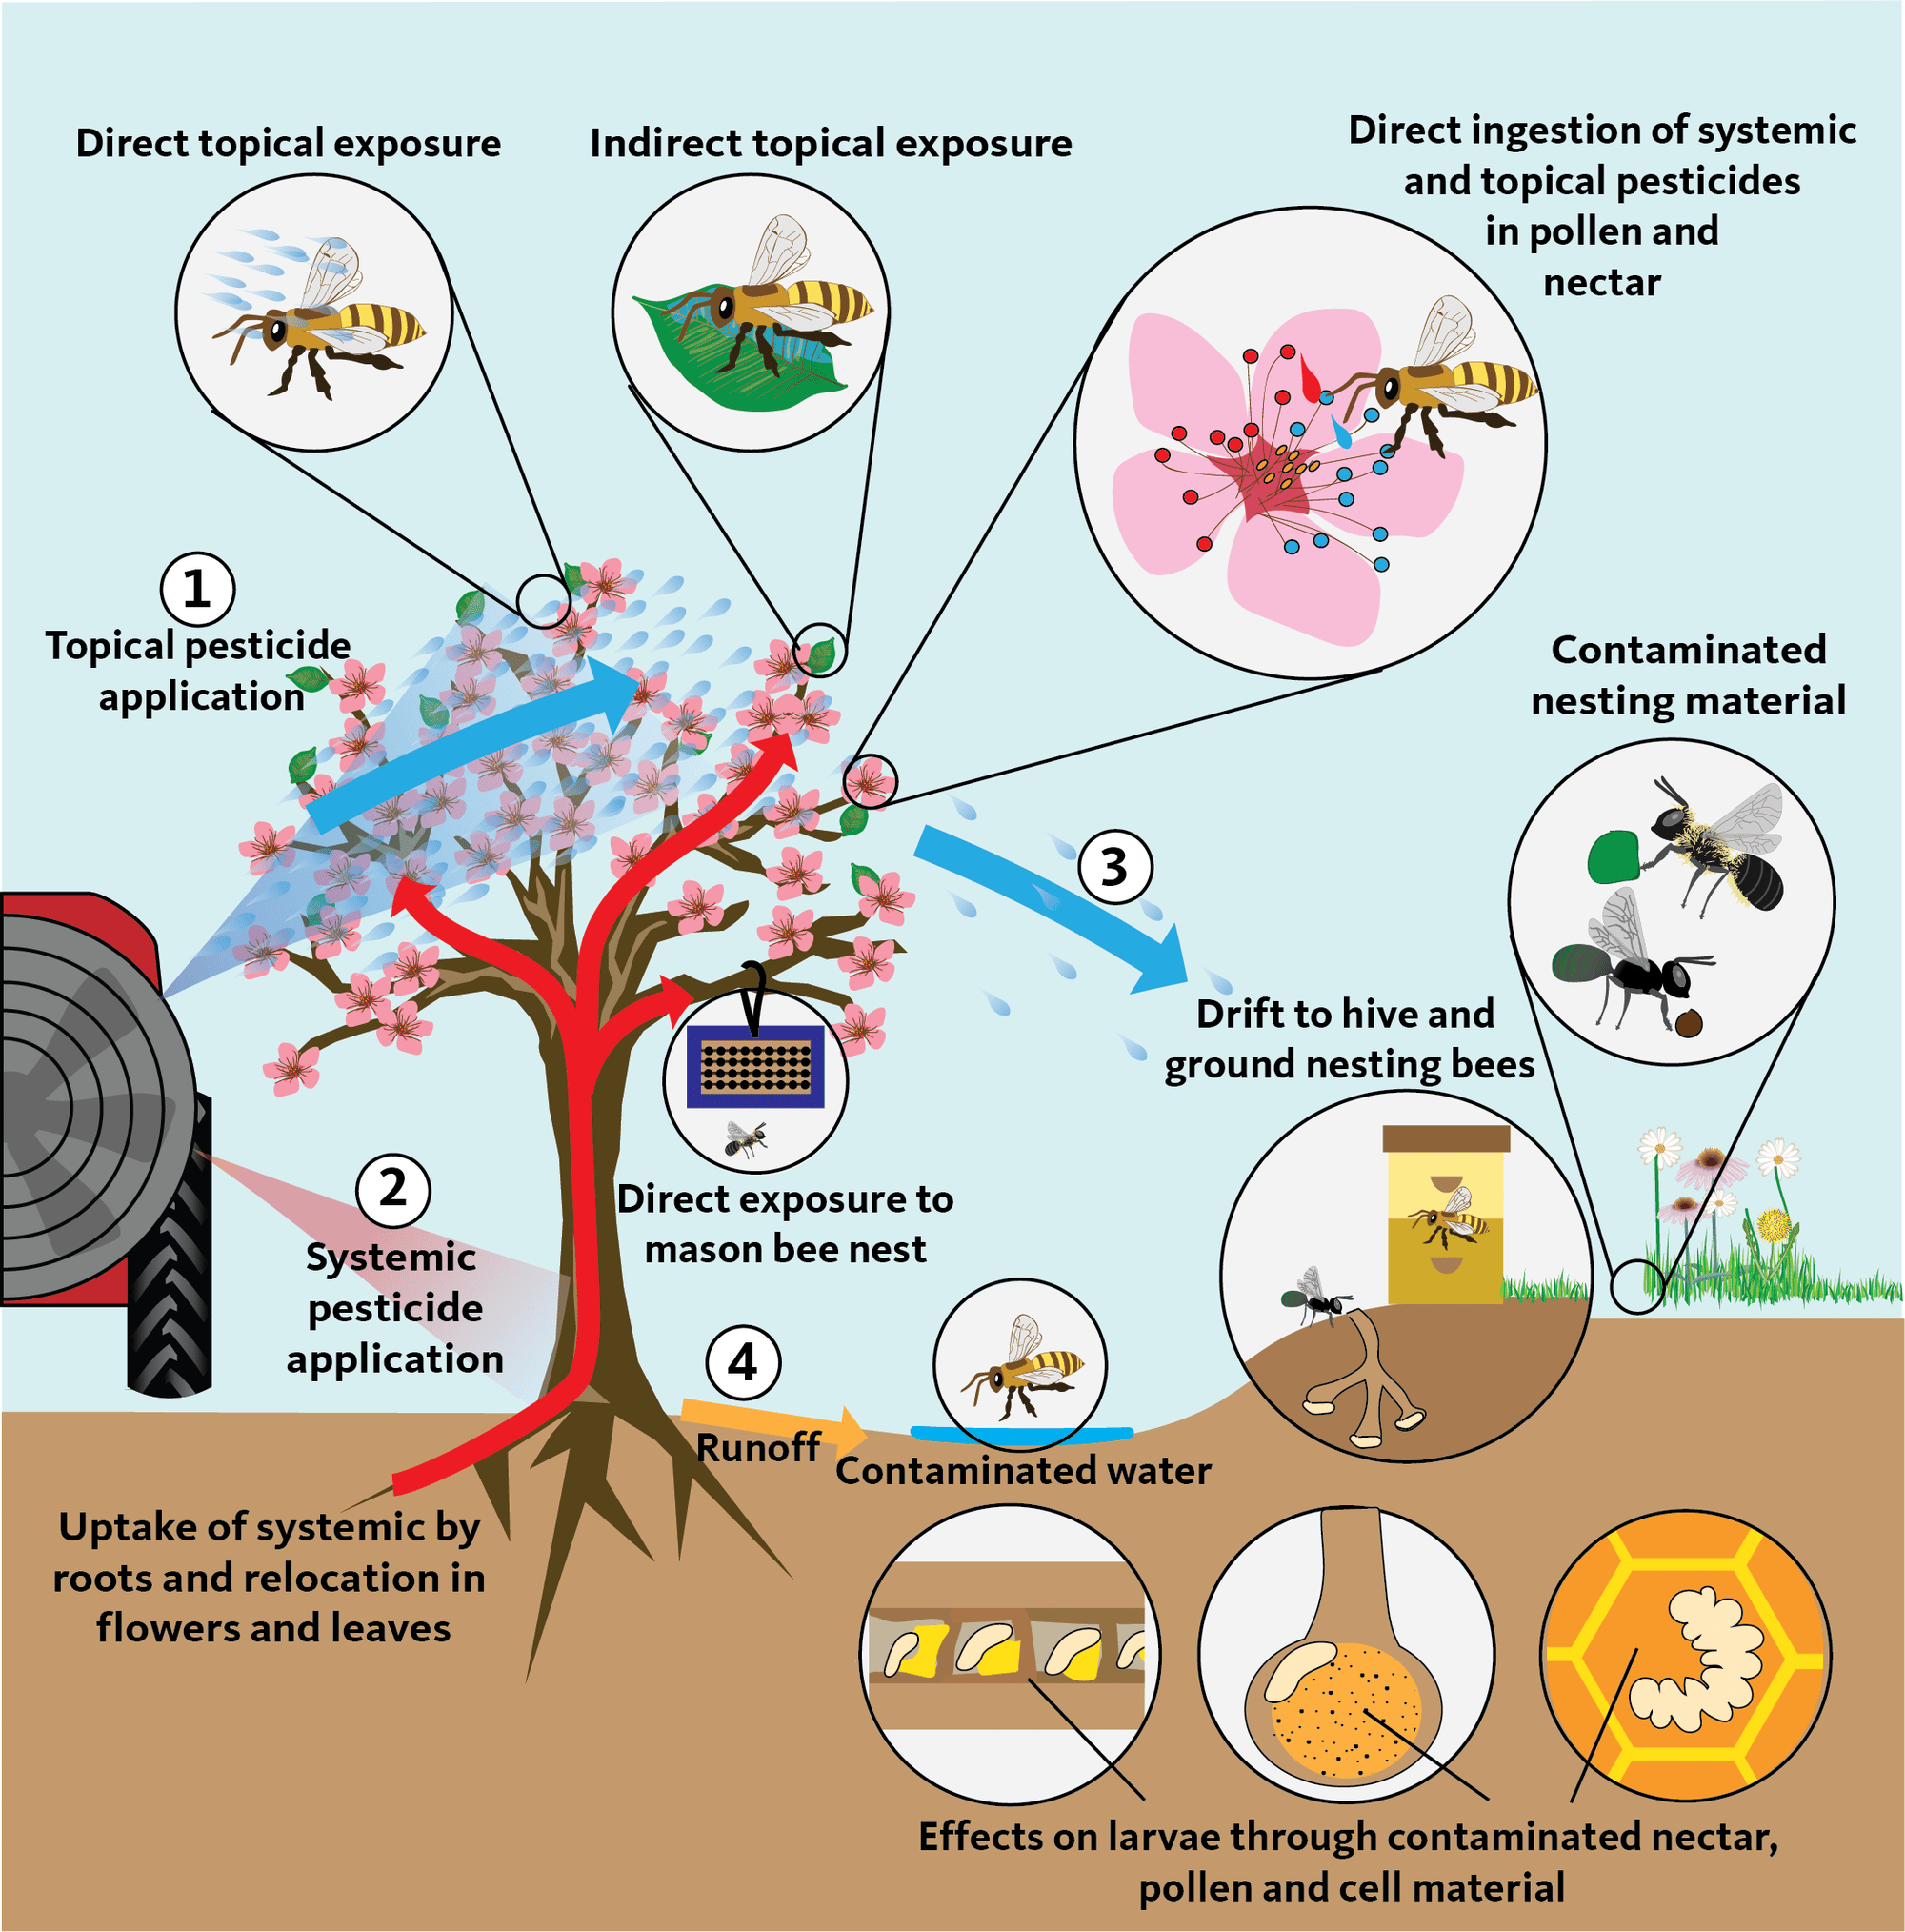 Pesticides injure insects through direct and indirect topical exposure, direct ingestion in pollen and nectar, contaminated nesting material, contaminated water, uptake through roots, and pesticide drift. Pesticides affect larvae through contaminated nectar, pollen and cell material.